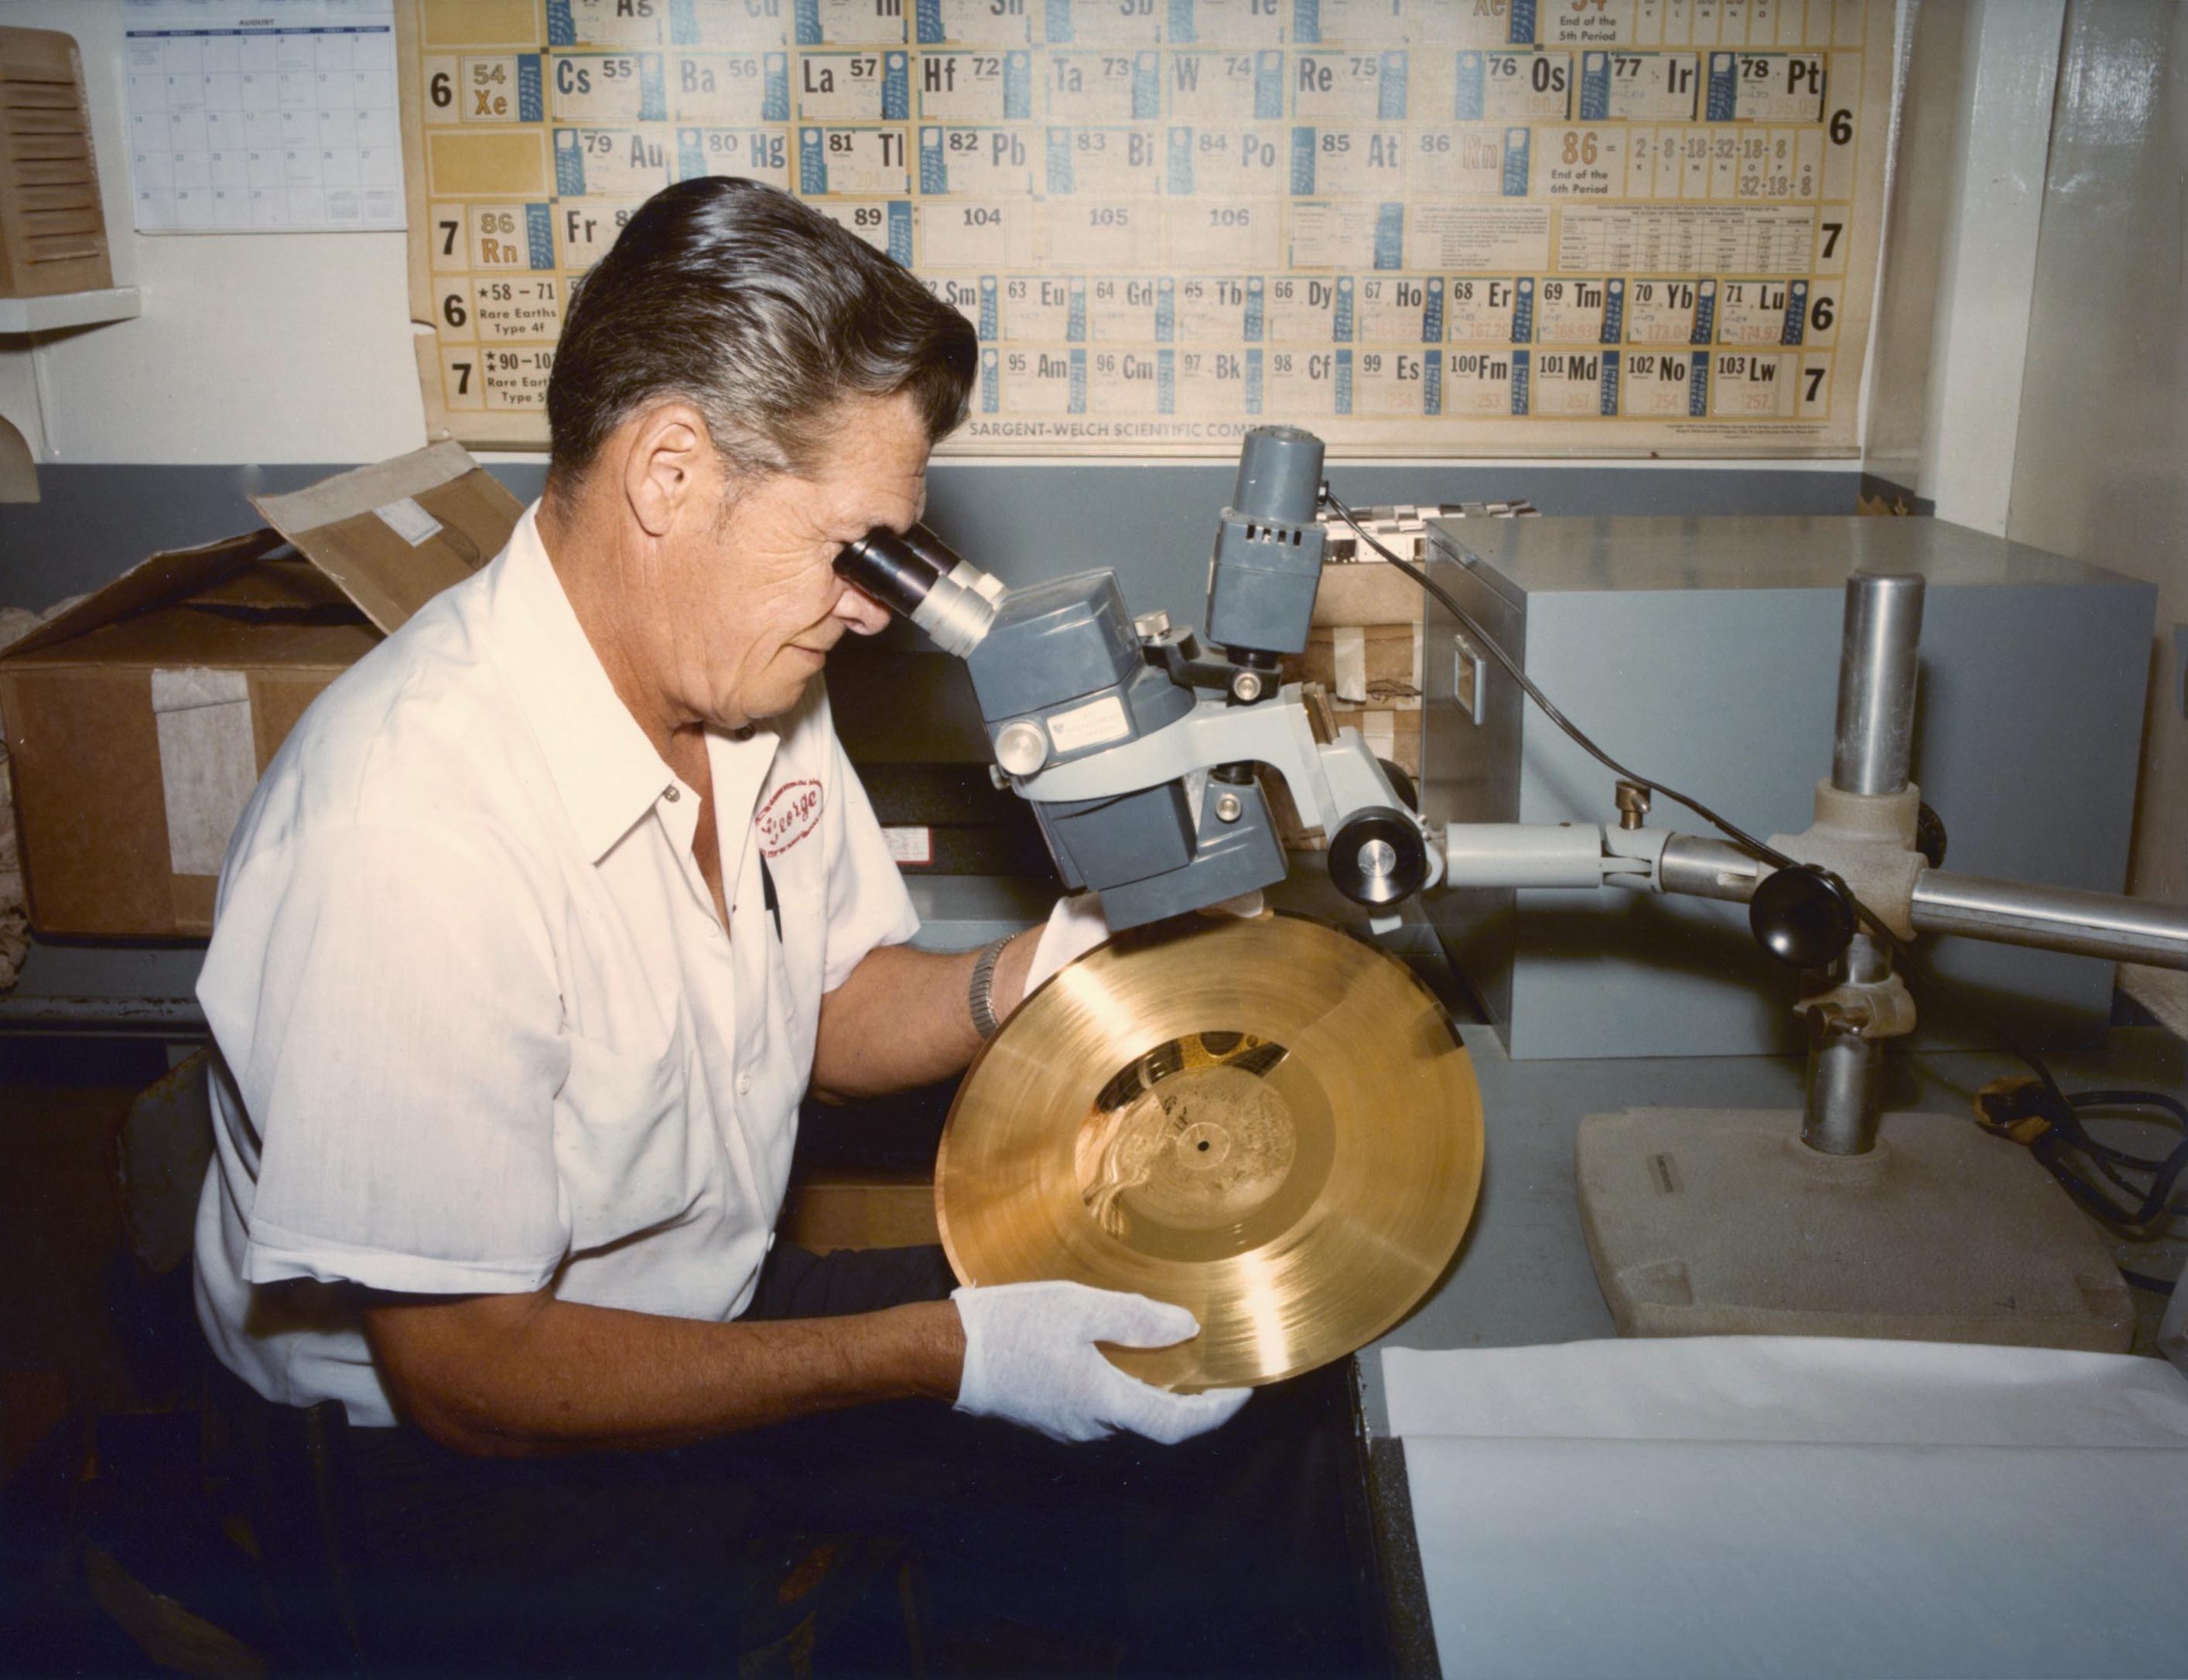 A man examines the Voyager Golden Record